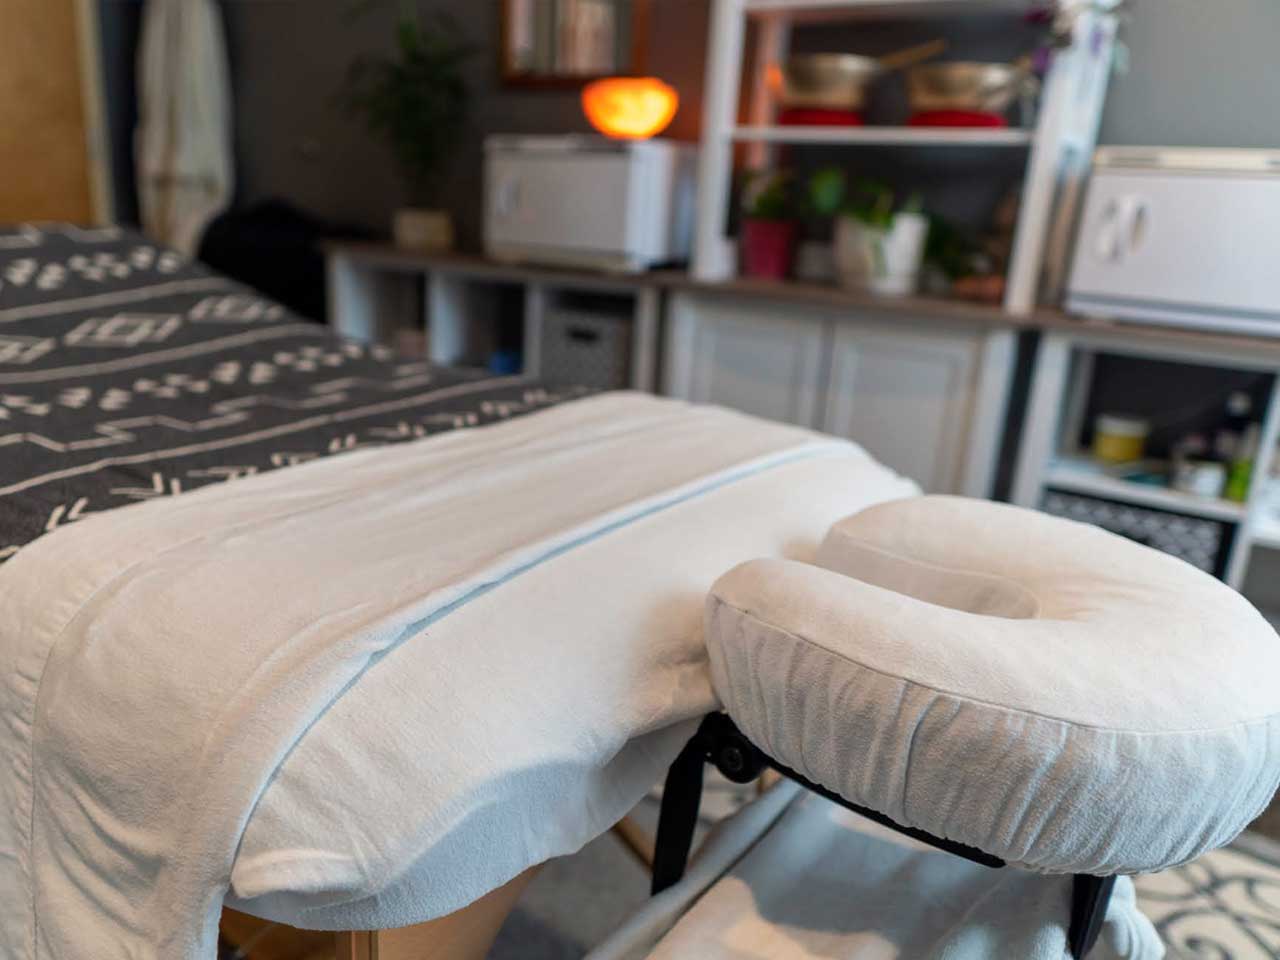 Picture of massage table with supplies